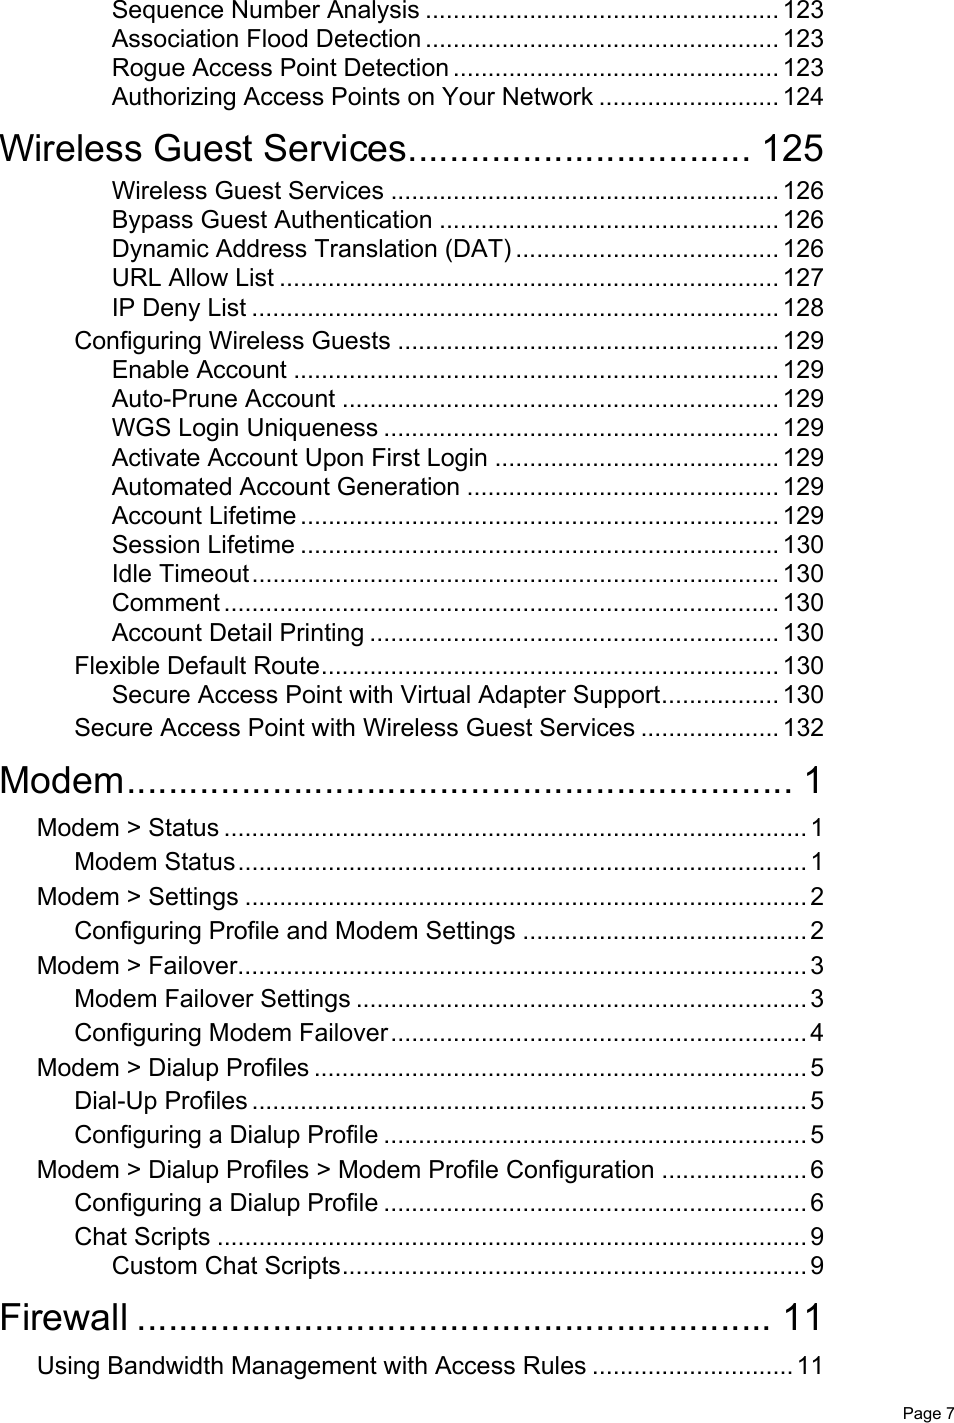   Page 7Sequence Number Analysis ................................................... 123Association Flood Detection ................................................... 123Rogue Access Point Detection ............................................... 123Authorizing Access Points on Your Network .......................... 124Wireless Guest Services................................. 125Wireless Guest Services ........................................................ 126Bypass Guest Authentication ................................................. 126Dynamic Address Translation (DAT) ...................................... 126URL Allow List ........................................................................ 127IP Deny List ............................................................................ 128Configuring Wireless Guests ....................................................... 129Enable Account ...................................................................... 129Auto-Prune Account ............................................................... 129WGS Login Uniqueness ......................................................... 129Activate Account Upon First Login ......................................... 129Automated Account Generation ............................................. 129Account Lifetime ..................................................................... 129Session Lifetime ..................................................................... 130Idle Timeout............................................................................ 130Comment ................................................................................ 130Account Detail Printing ........................................................... 130Flexible Default Route.................................................................. 130Secure Access Point with Virtual Adapter Support................. 130Secure Access Point with Wireless Guest Services .................... 132Modem................................................................ 1Modem &gt; Status .................................................................................... 1Modem Status.................................................................................. 1Modem &gt; Settings ................................................................................. 2Configuring Profile and Modem Settings ......................................... 2Modem &gt; Failover.................................................................................. 3Modem Failover Settings ................................................................. 3Configuring Modem Failover............................................................ 4Modem &gt; Dialup Profiles ....................................................................... 5Dial-Up Profiles ................................................................................ 5Configuring a Dialup Profile ............................................................. 5Modem &gt; Dialup Profiles &gt; Modem Profile Configuration ..................... 6Configuring a Dialup Profile ............................................................. 6Chat Scripts ..................................................................................... 9Custom Chat Scripts................................................................... 9Firewall ............................................................. 11Using Bandwidth Management with Access Rules ............................. 11